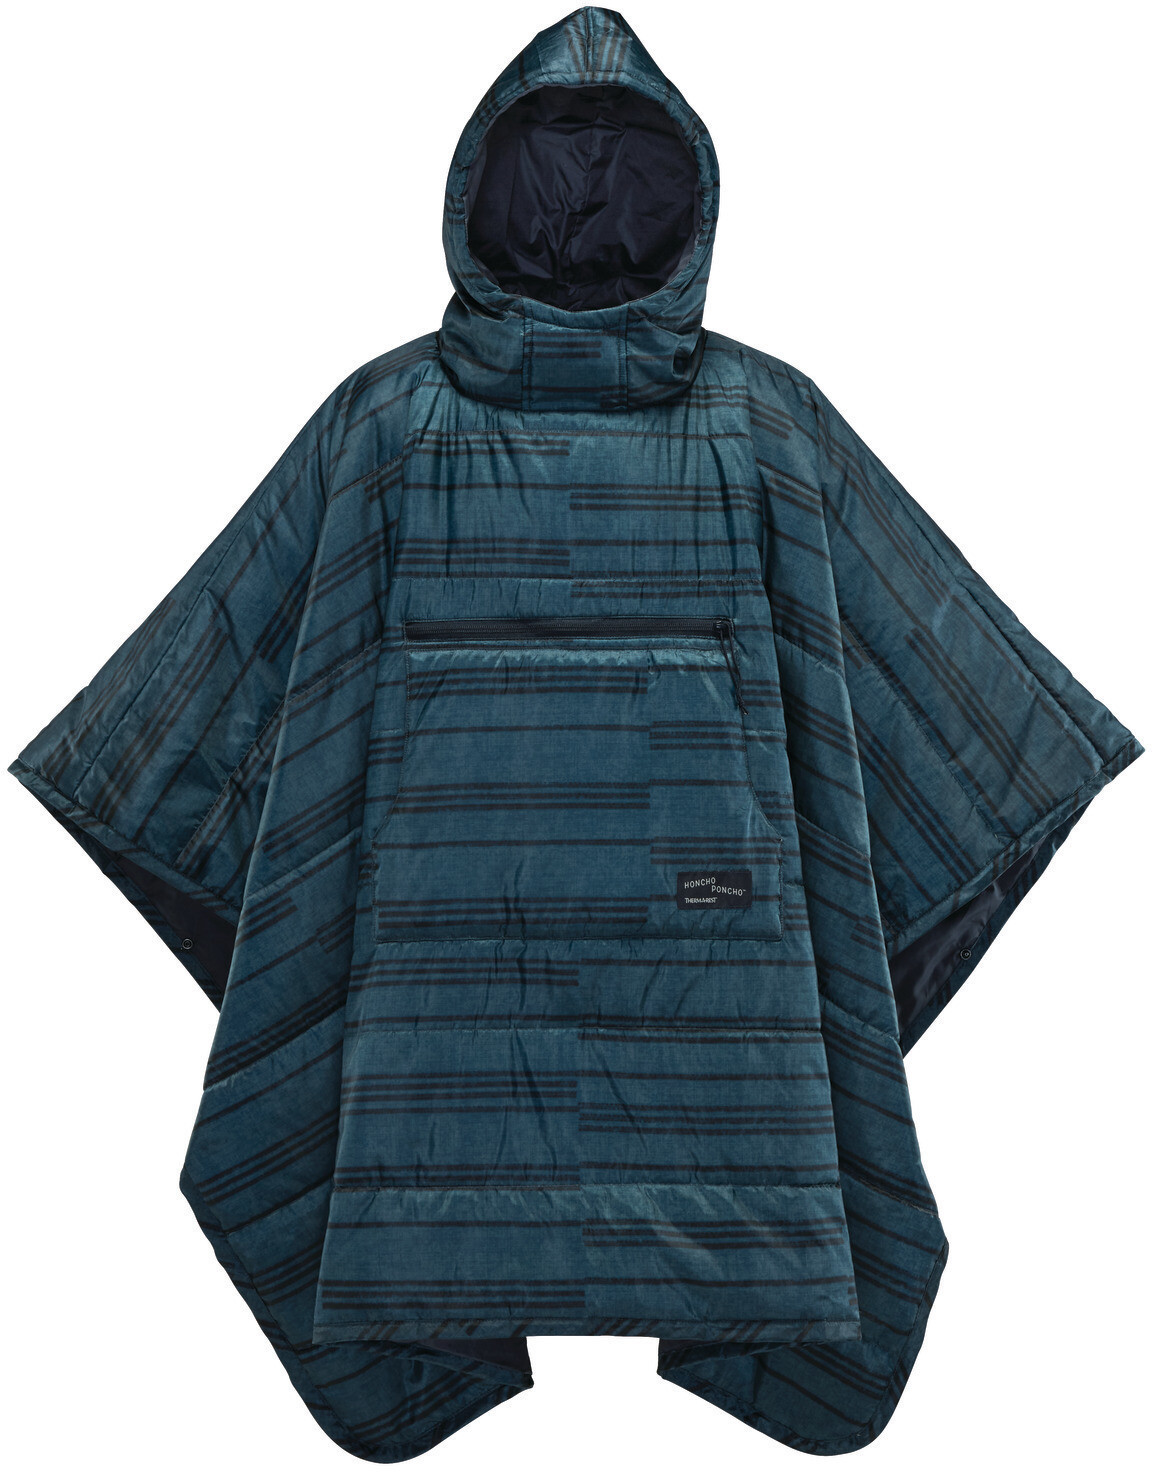 Therm-a-Rest Honcho Poncho blue print One Size